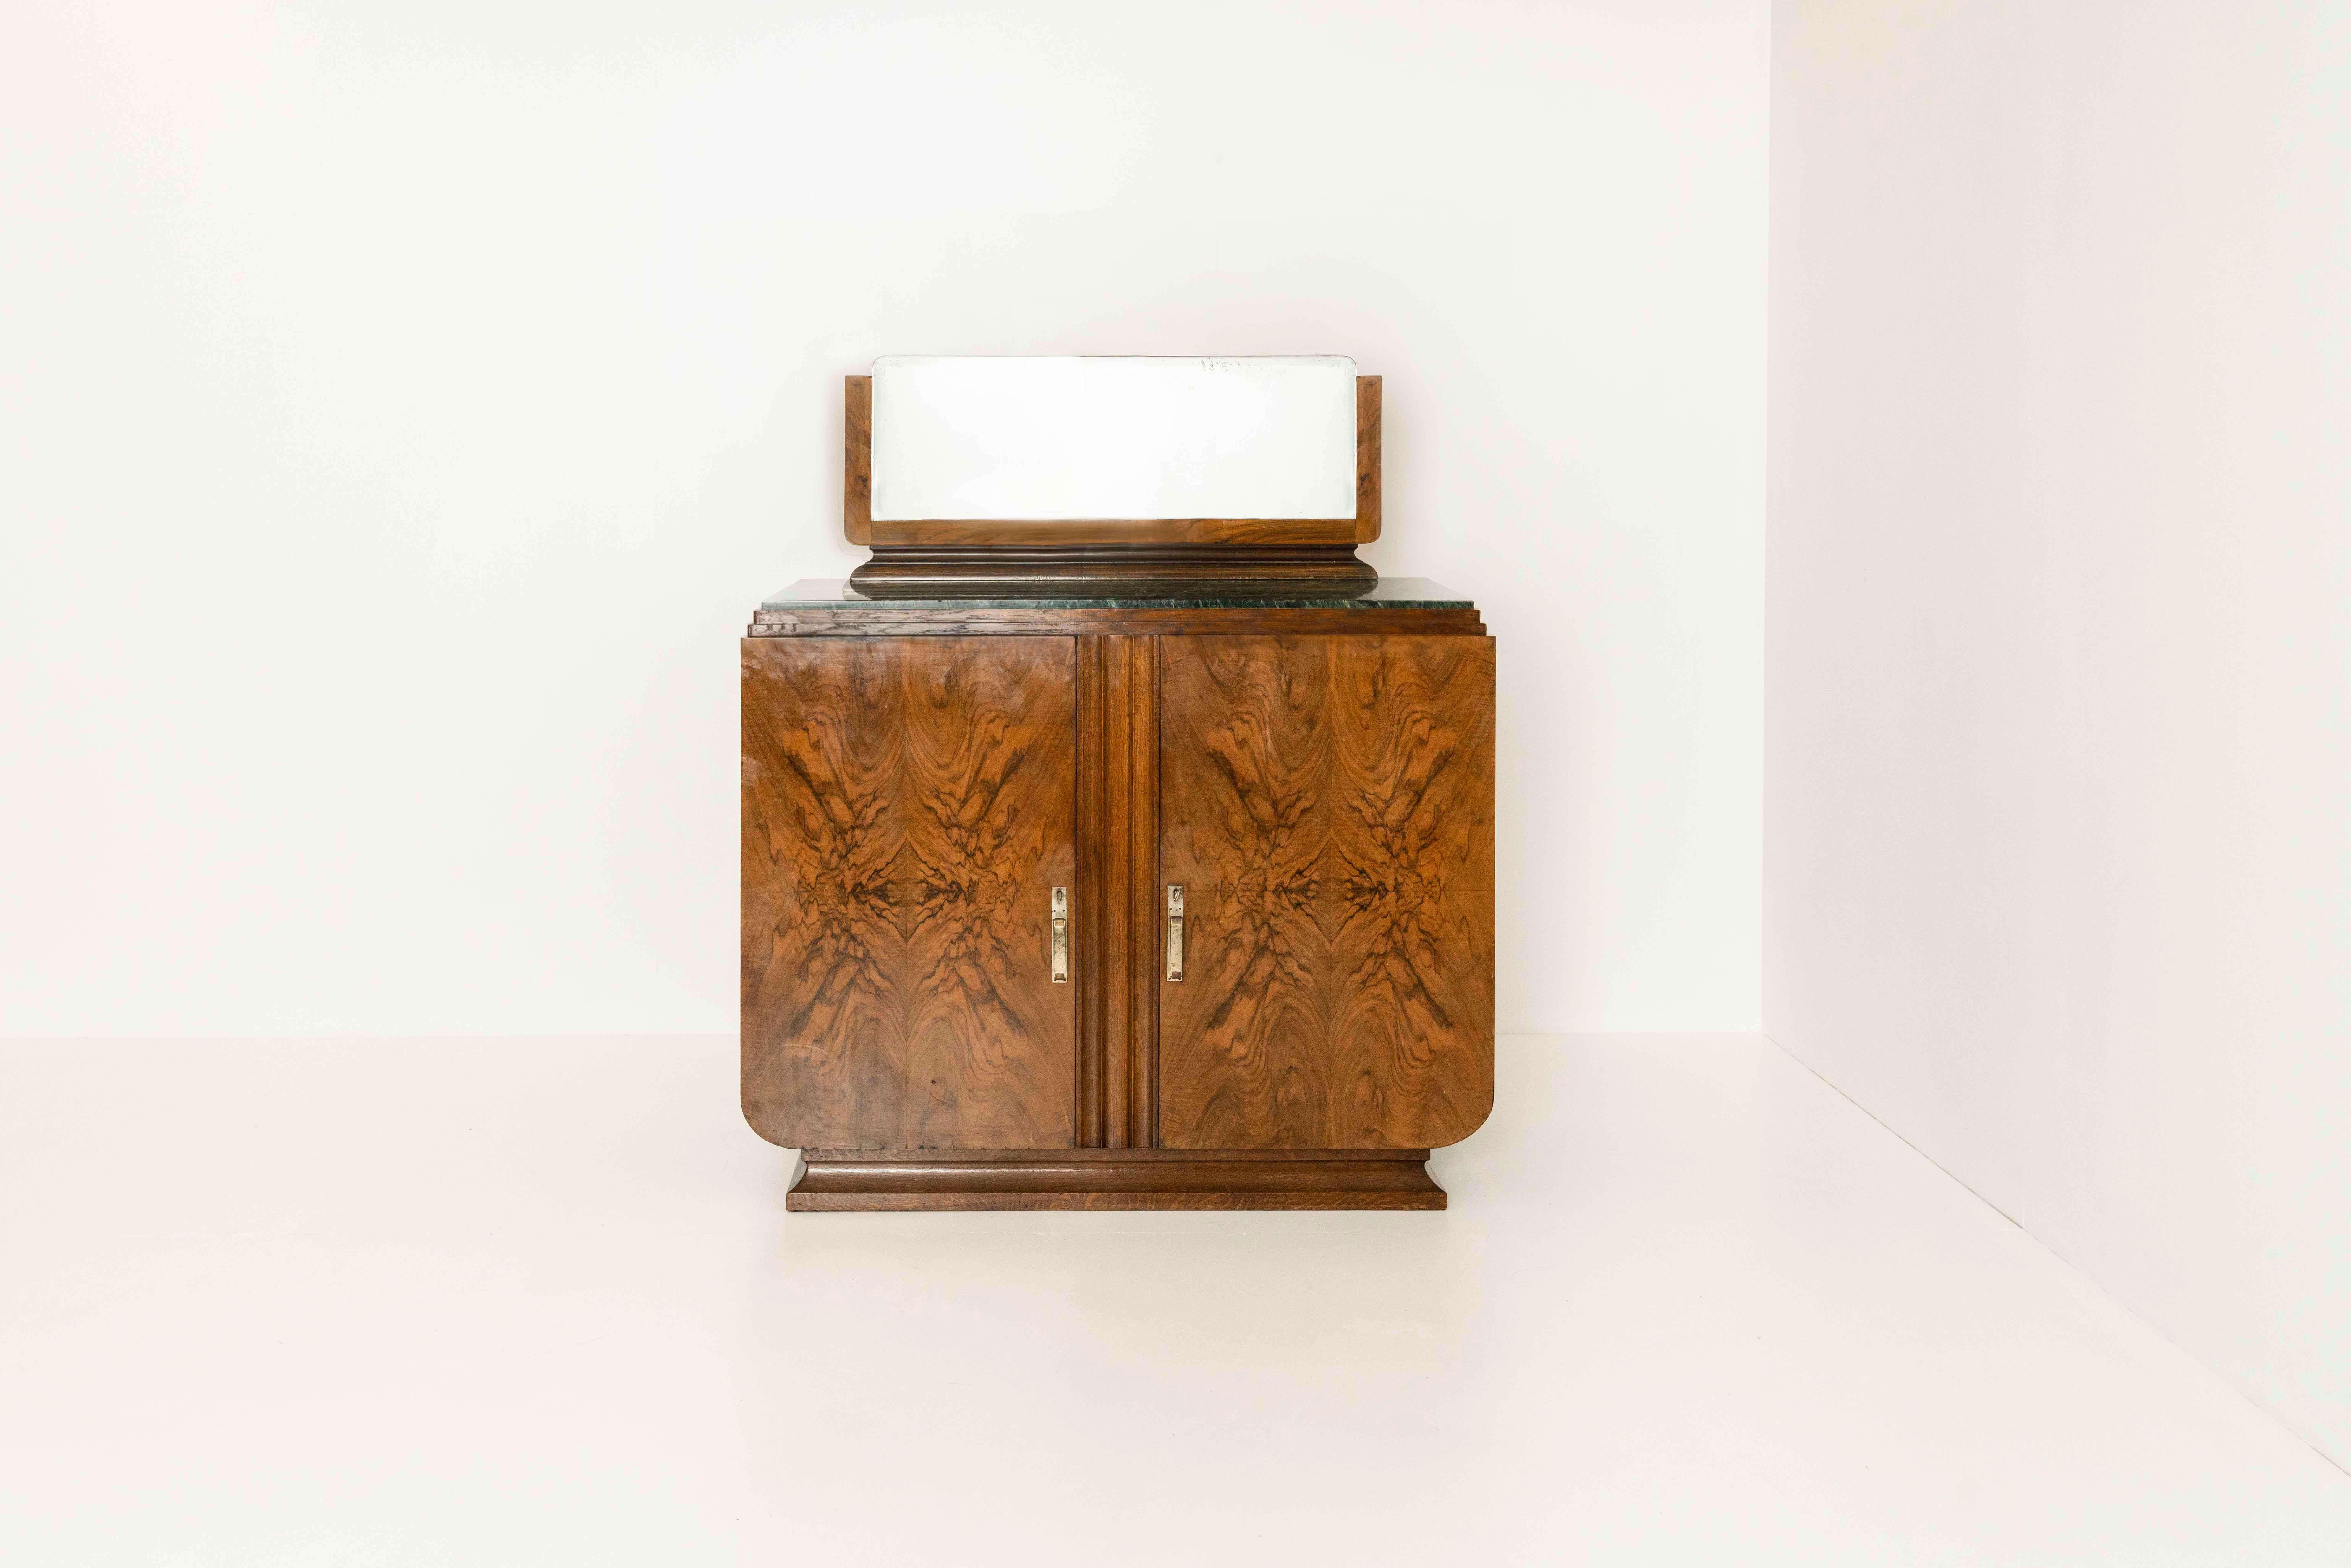 Nice Art Deco cabinet in mirrored mahogany with a marble top and mirror. The cabinet has a very attractive design with the cabinet resting on a base and giving it a beautiful shape. The top is made of green marble. The cabinet has two shelves and